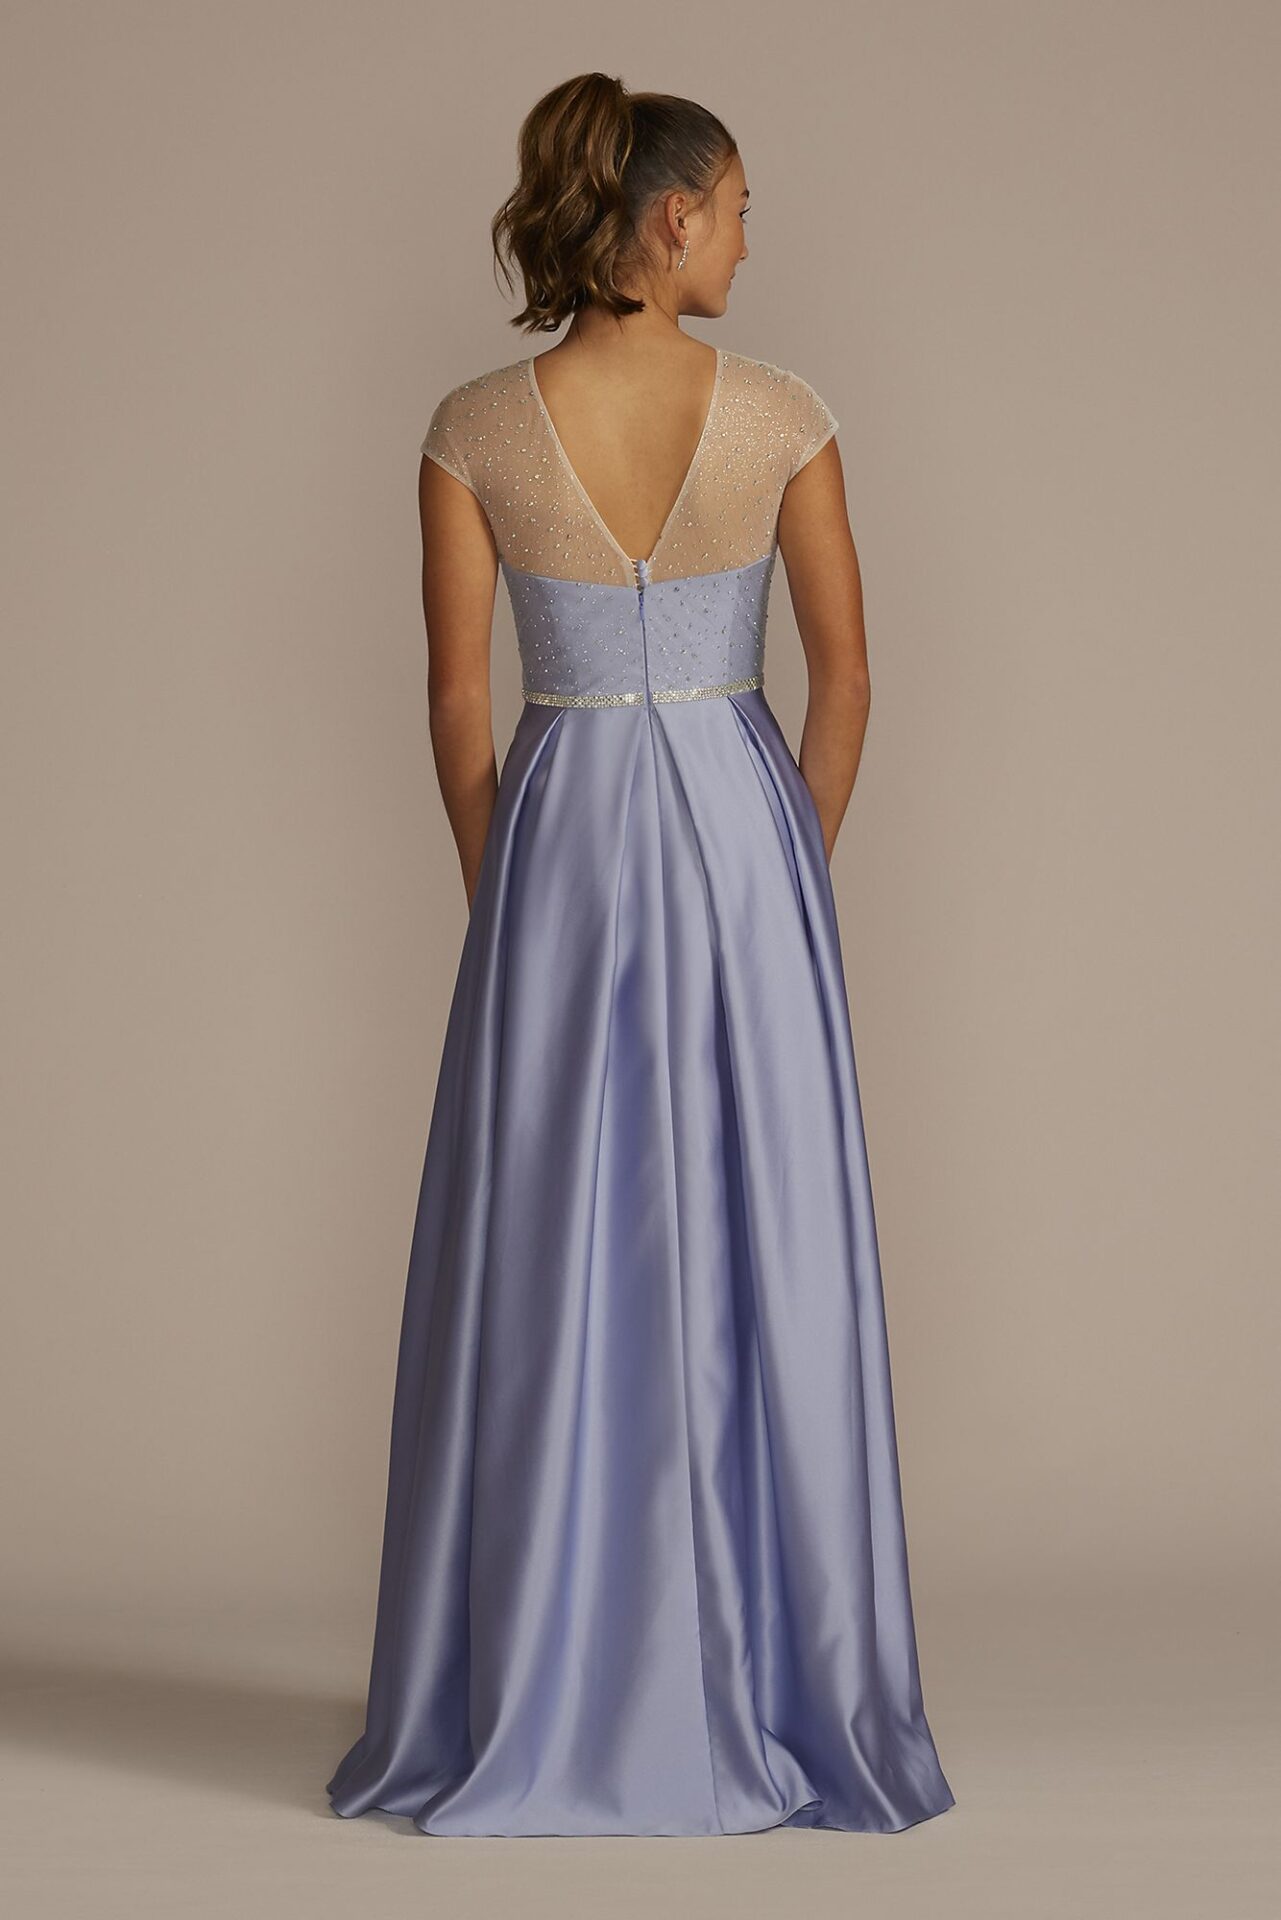 Satin Ball Gown with Sheer Embellished Top D24NY23015